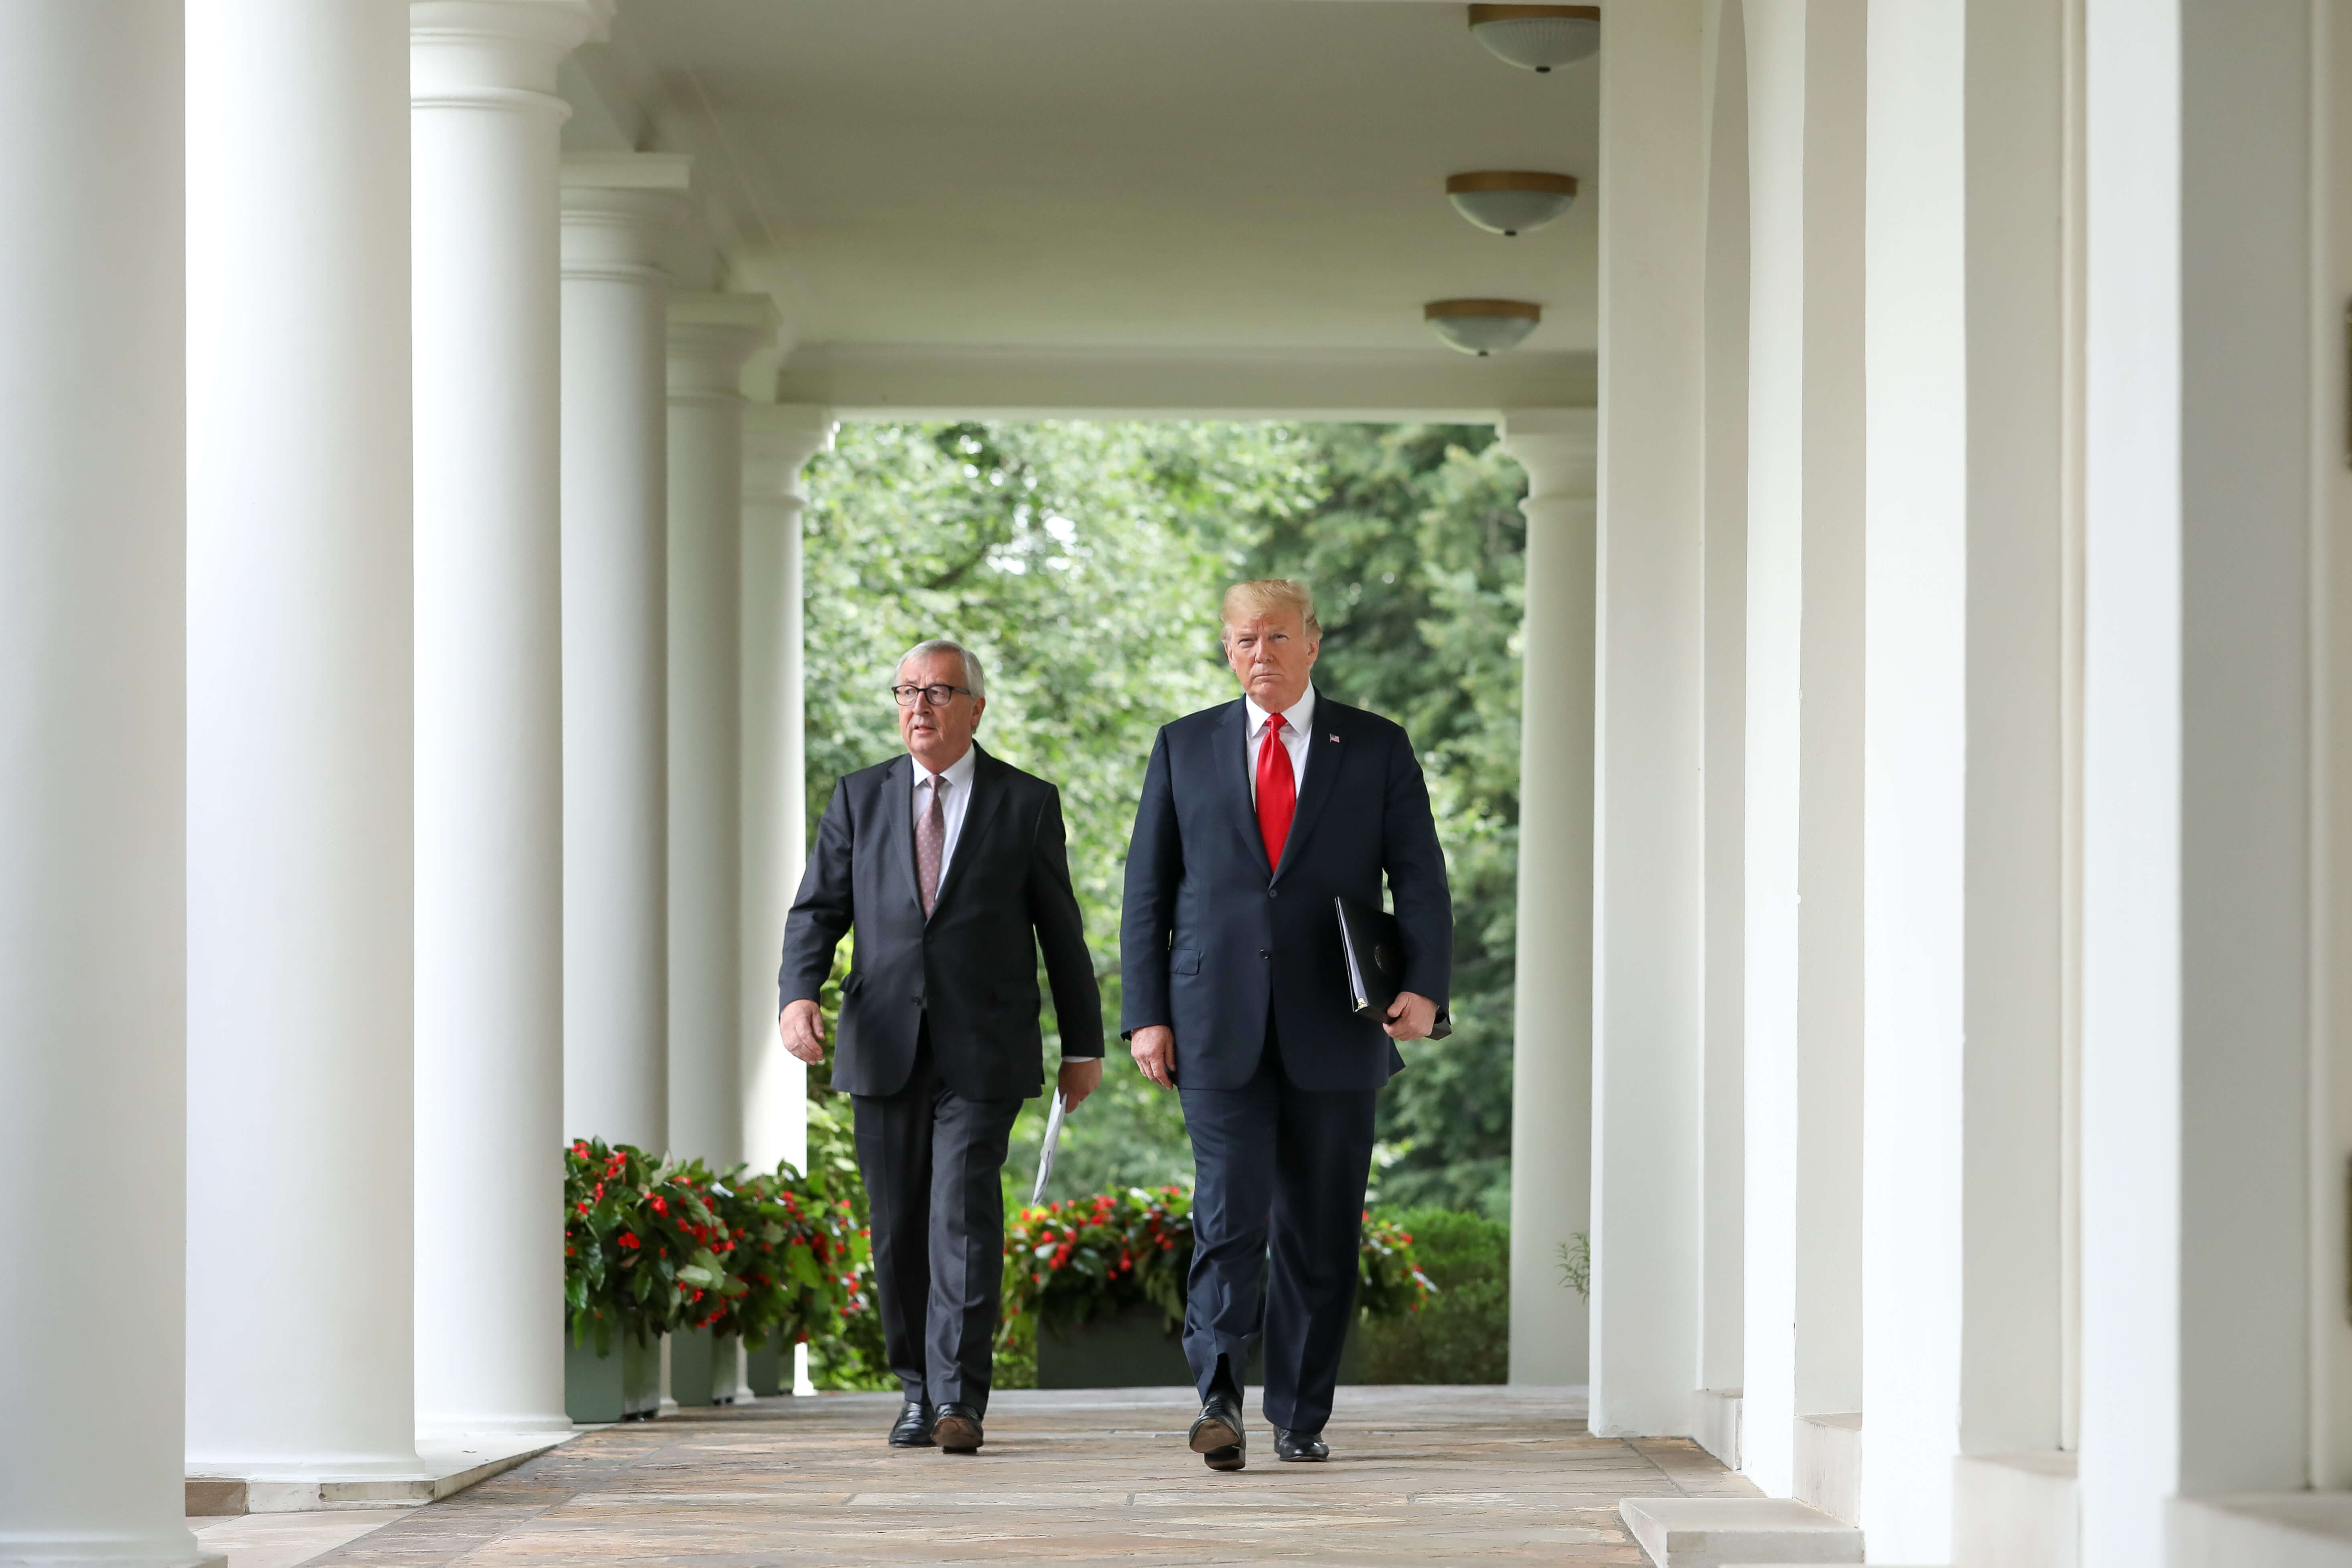 President Trump with then-EU Commission president Jean-Claude Juncker, July 2018. © The Epoch Times/Flickr